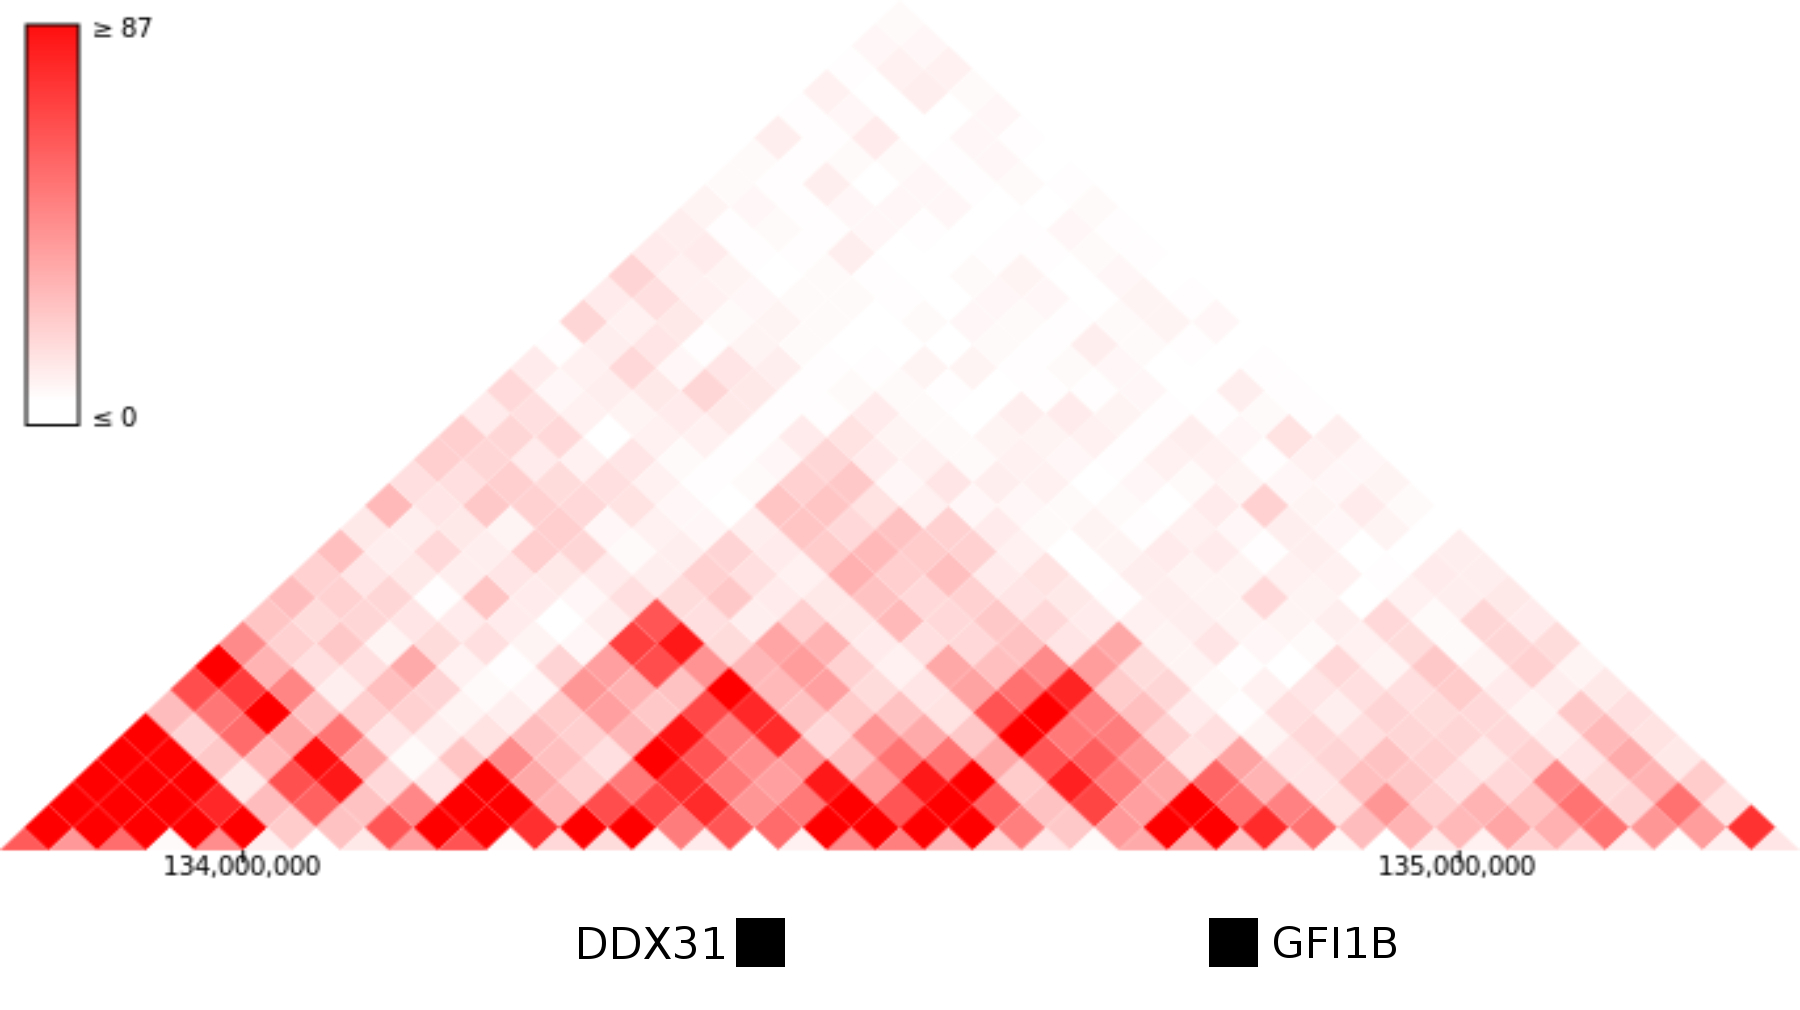 Hi-C data for the GFI1B locus from human ES cells.